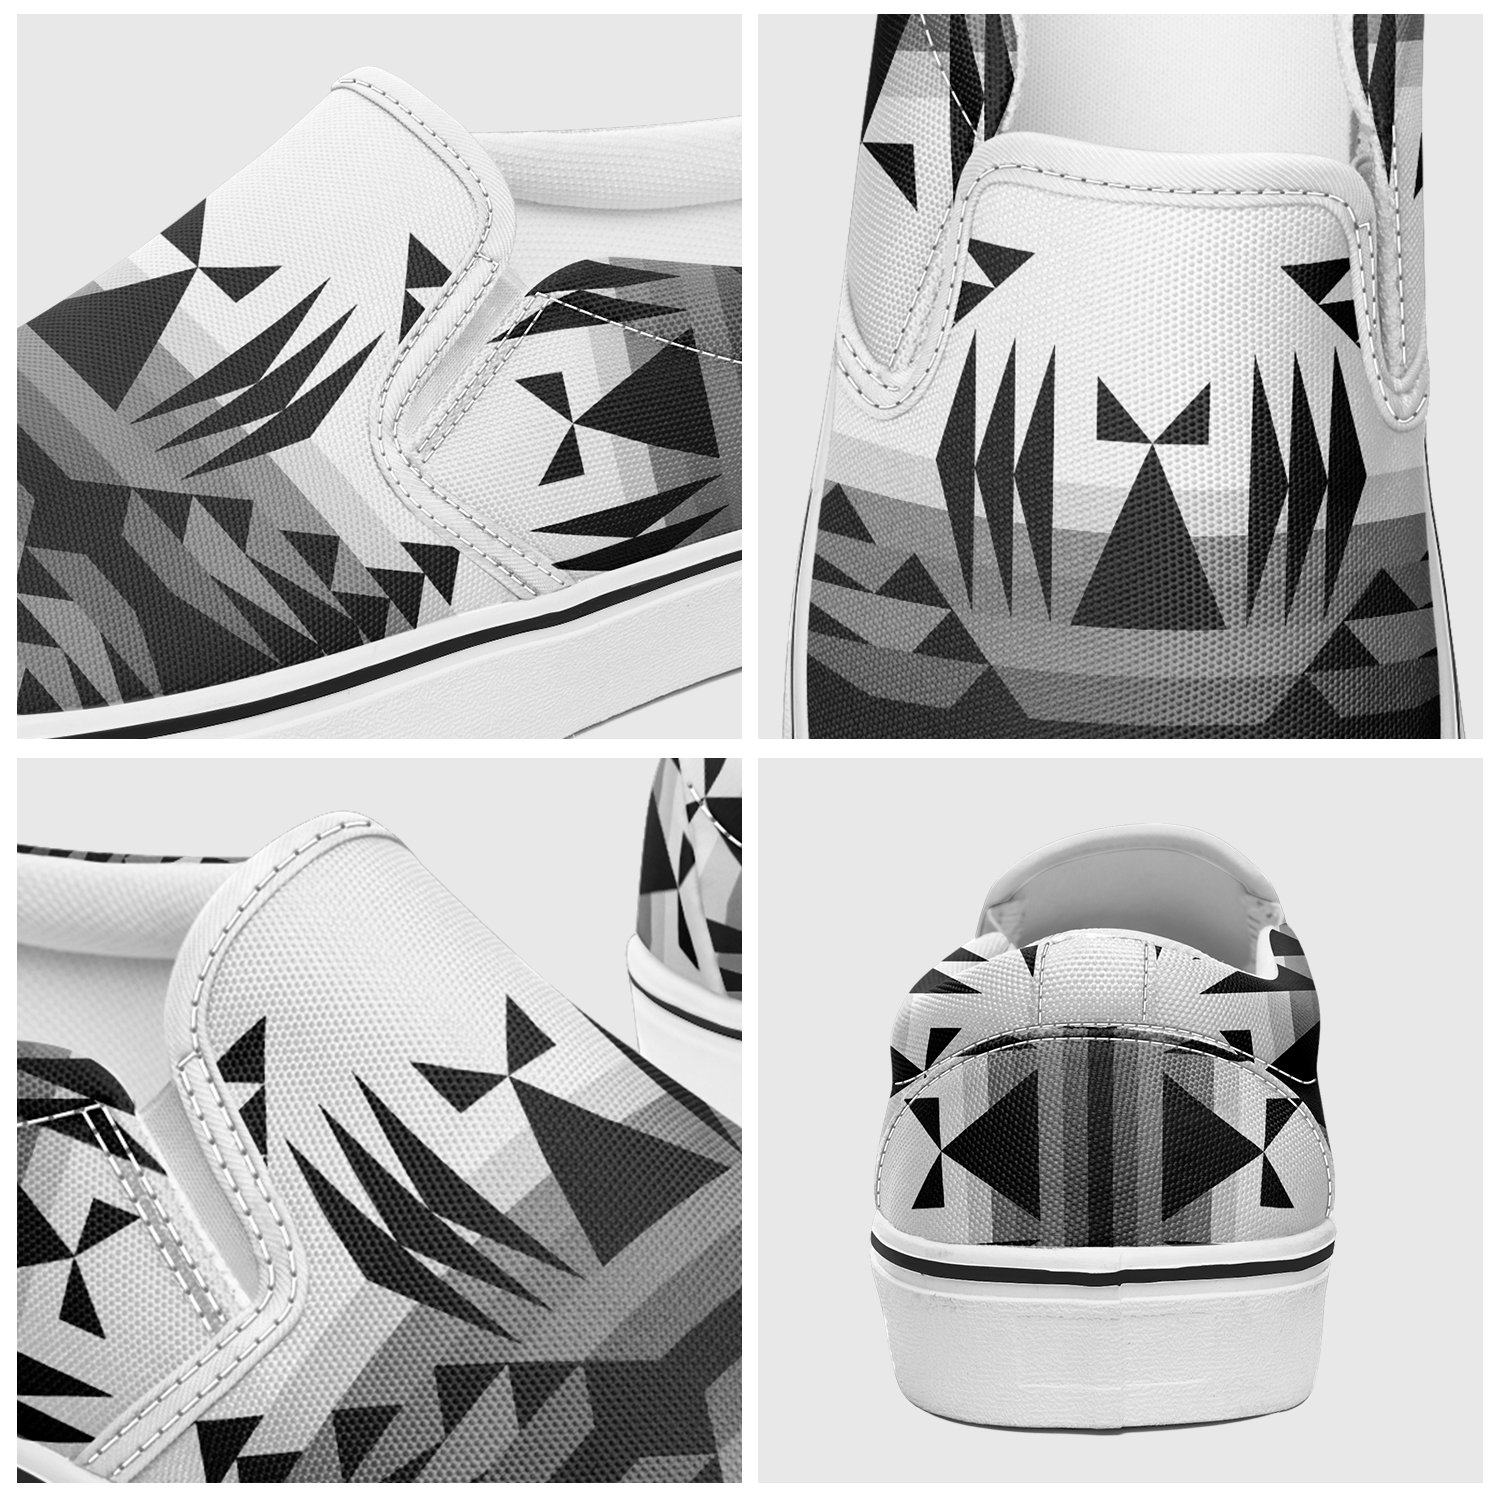 Between the Mountains White and Black Otoyimm Canvas Slip On Shoes 49 Dzine 